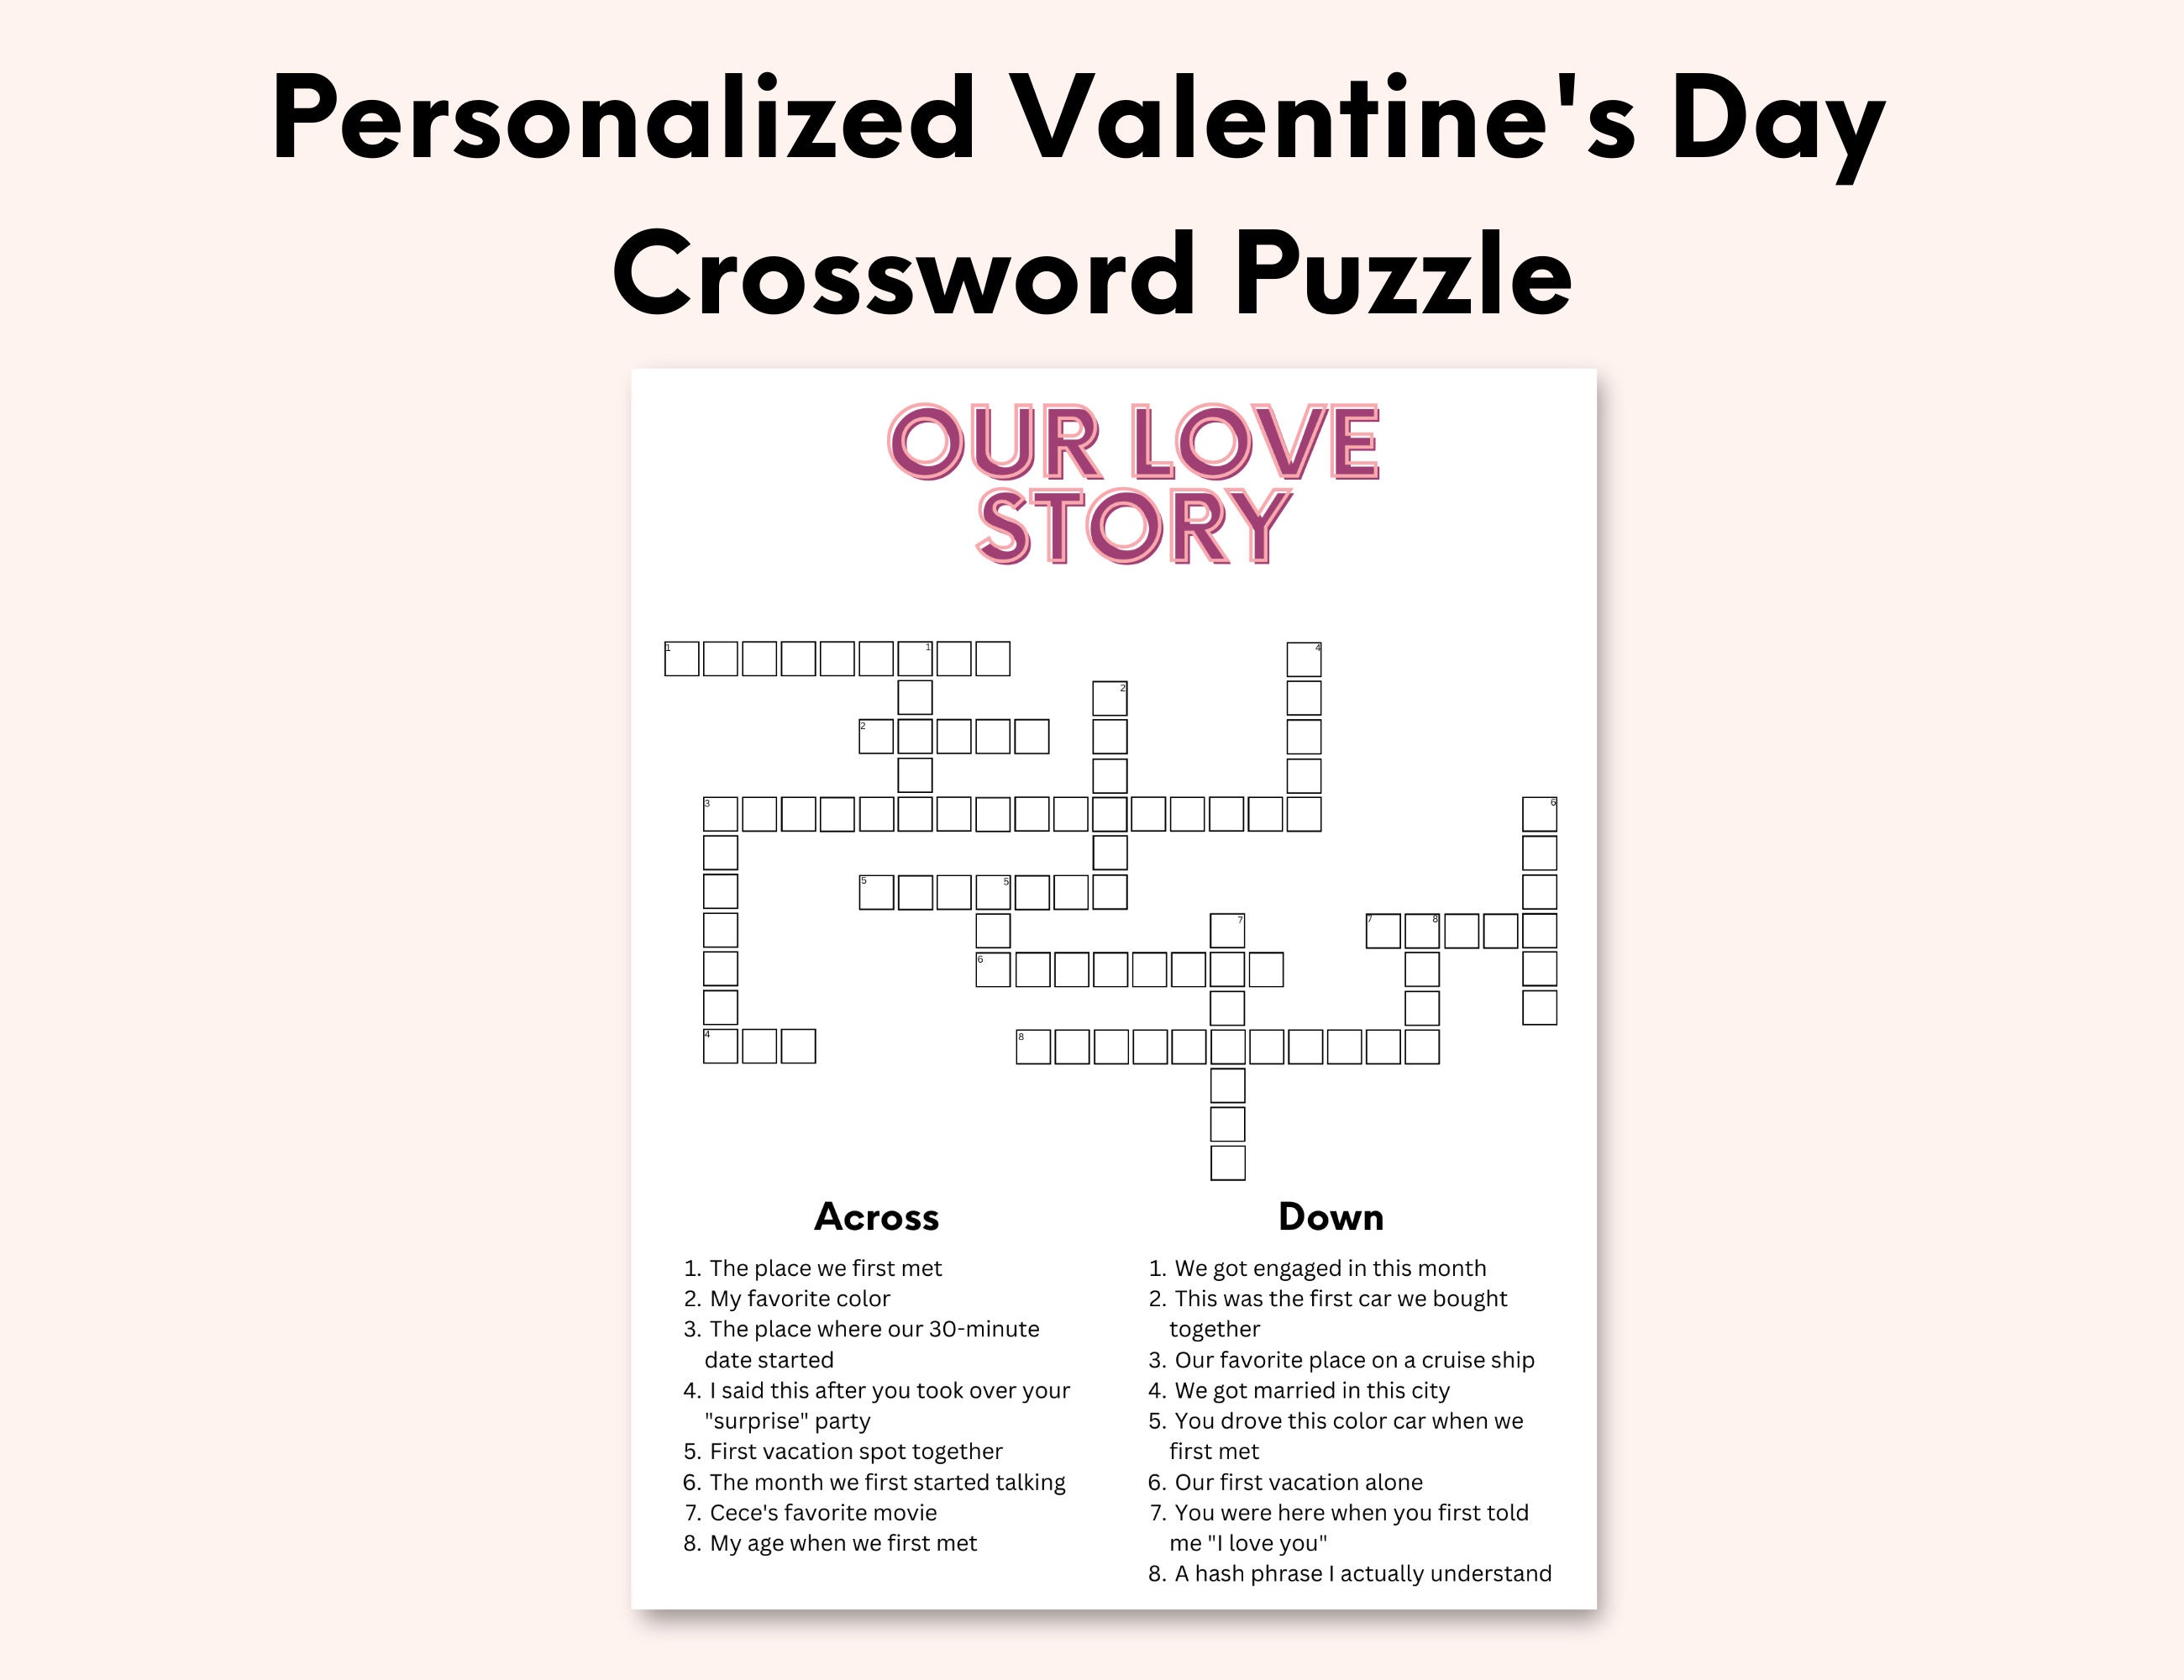 Personalized valentines day crossword puzzle custom valentines day puzzle anniversary gift wedding crossword engagement crossword